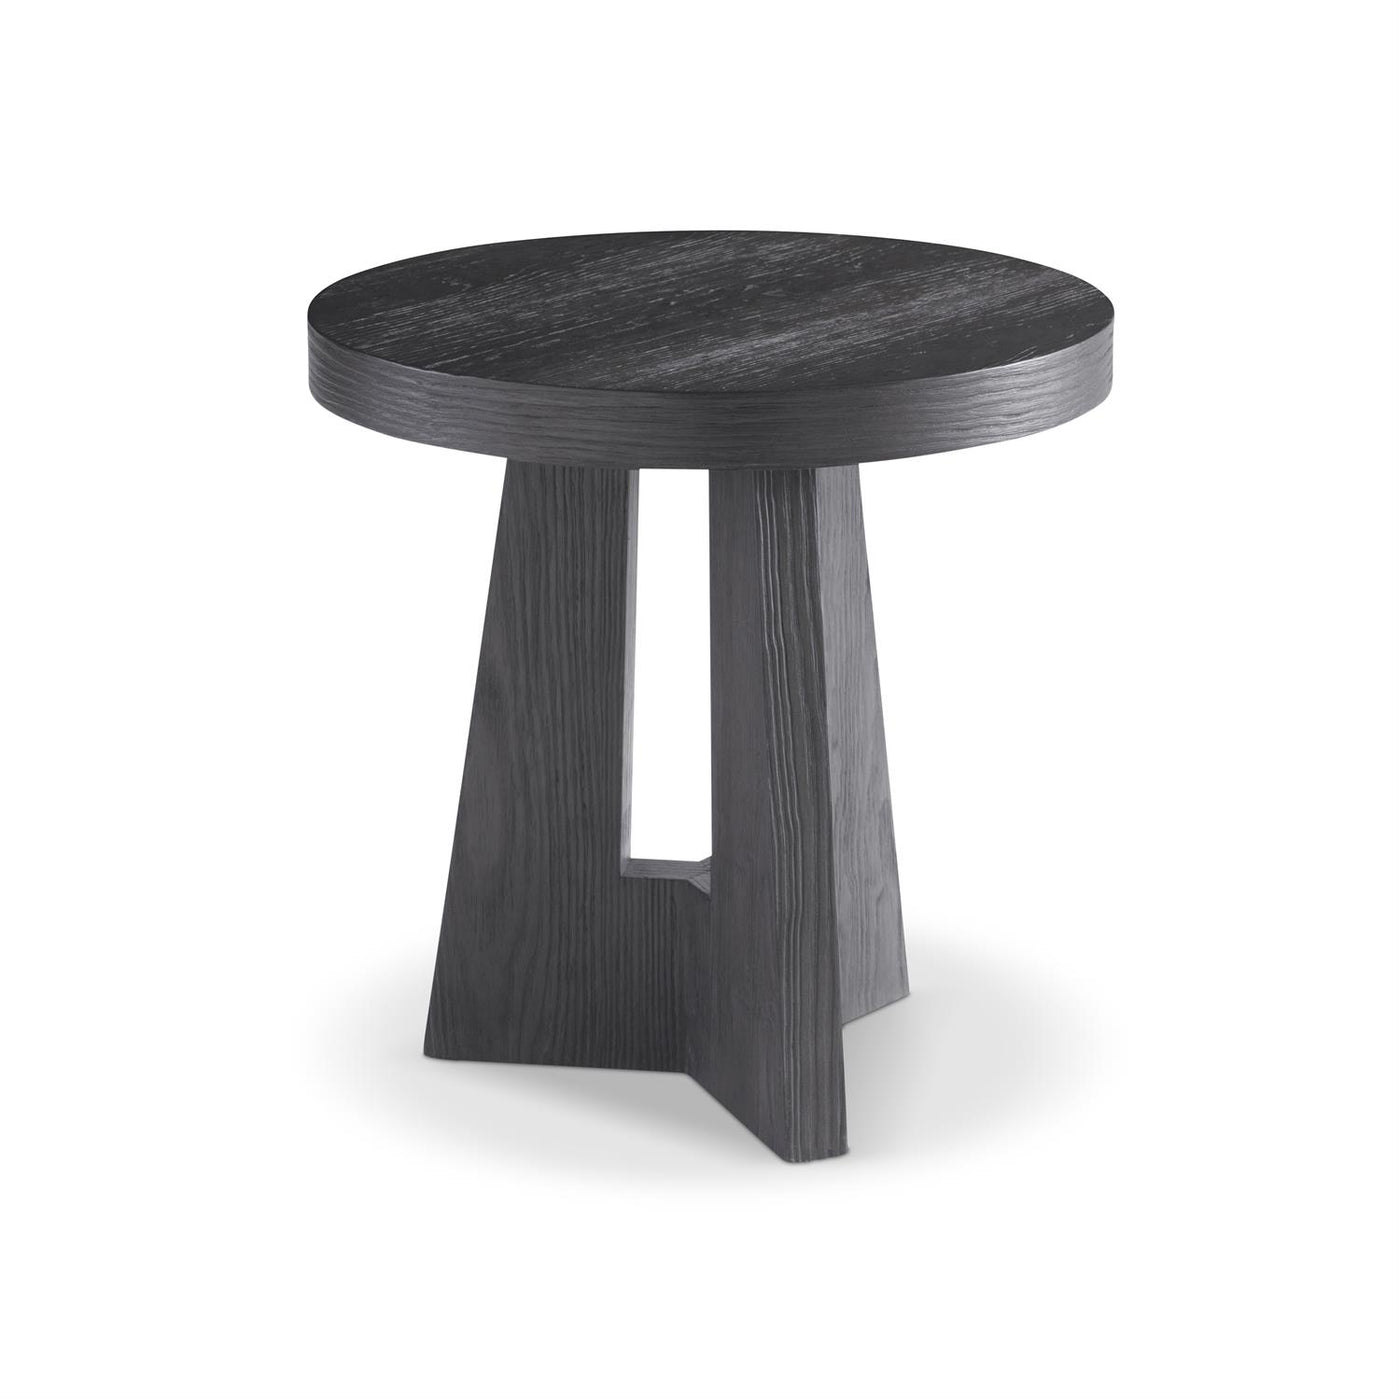 SIDE TABLE ROUND WOOD TRIANGLE LEGS